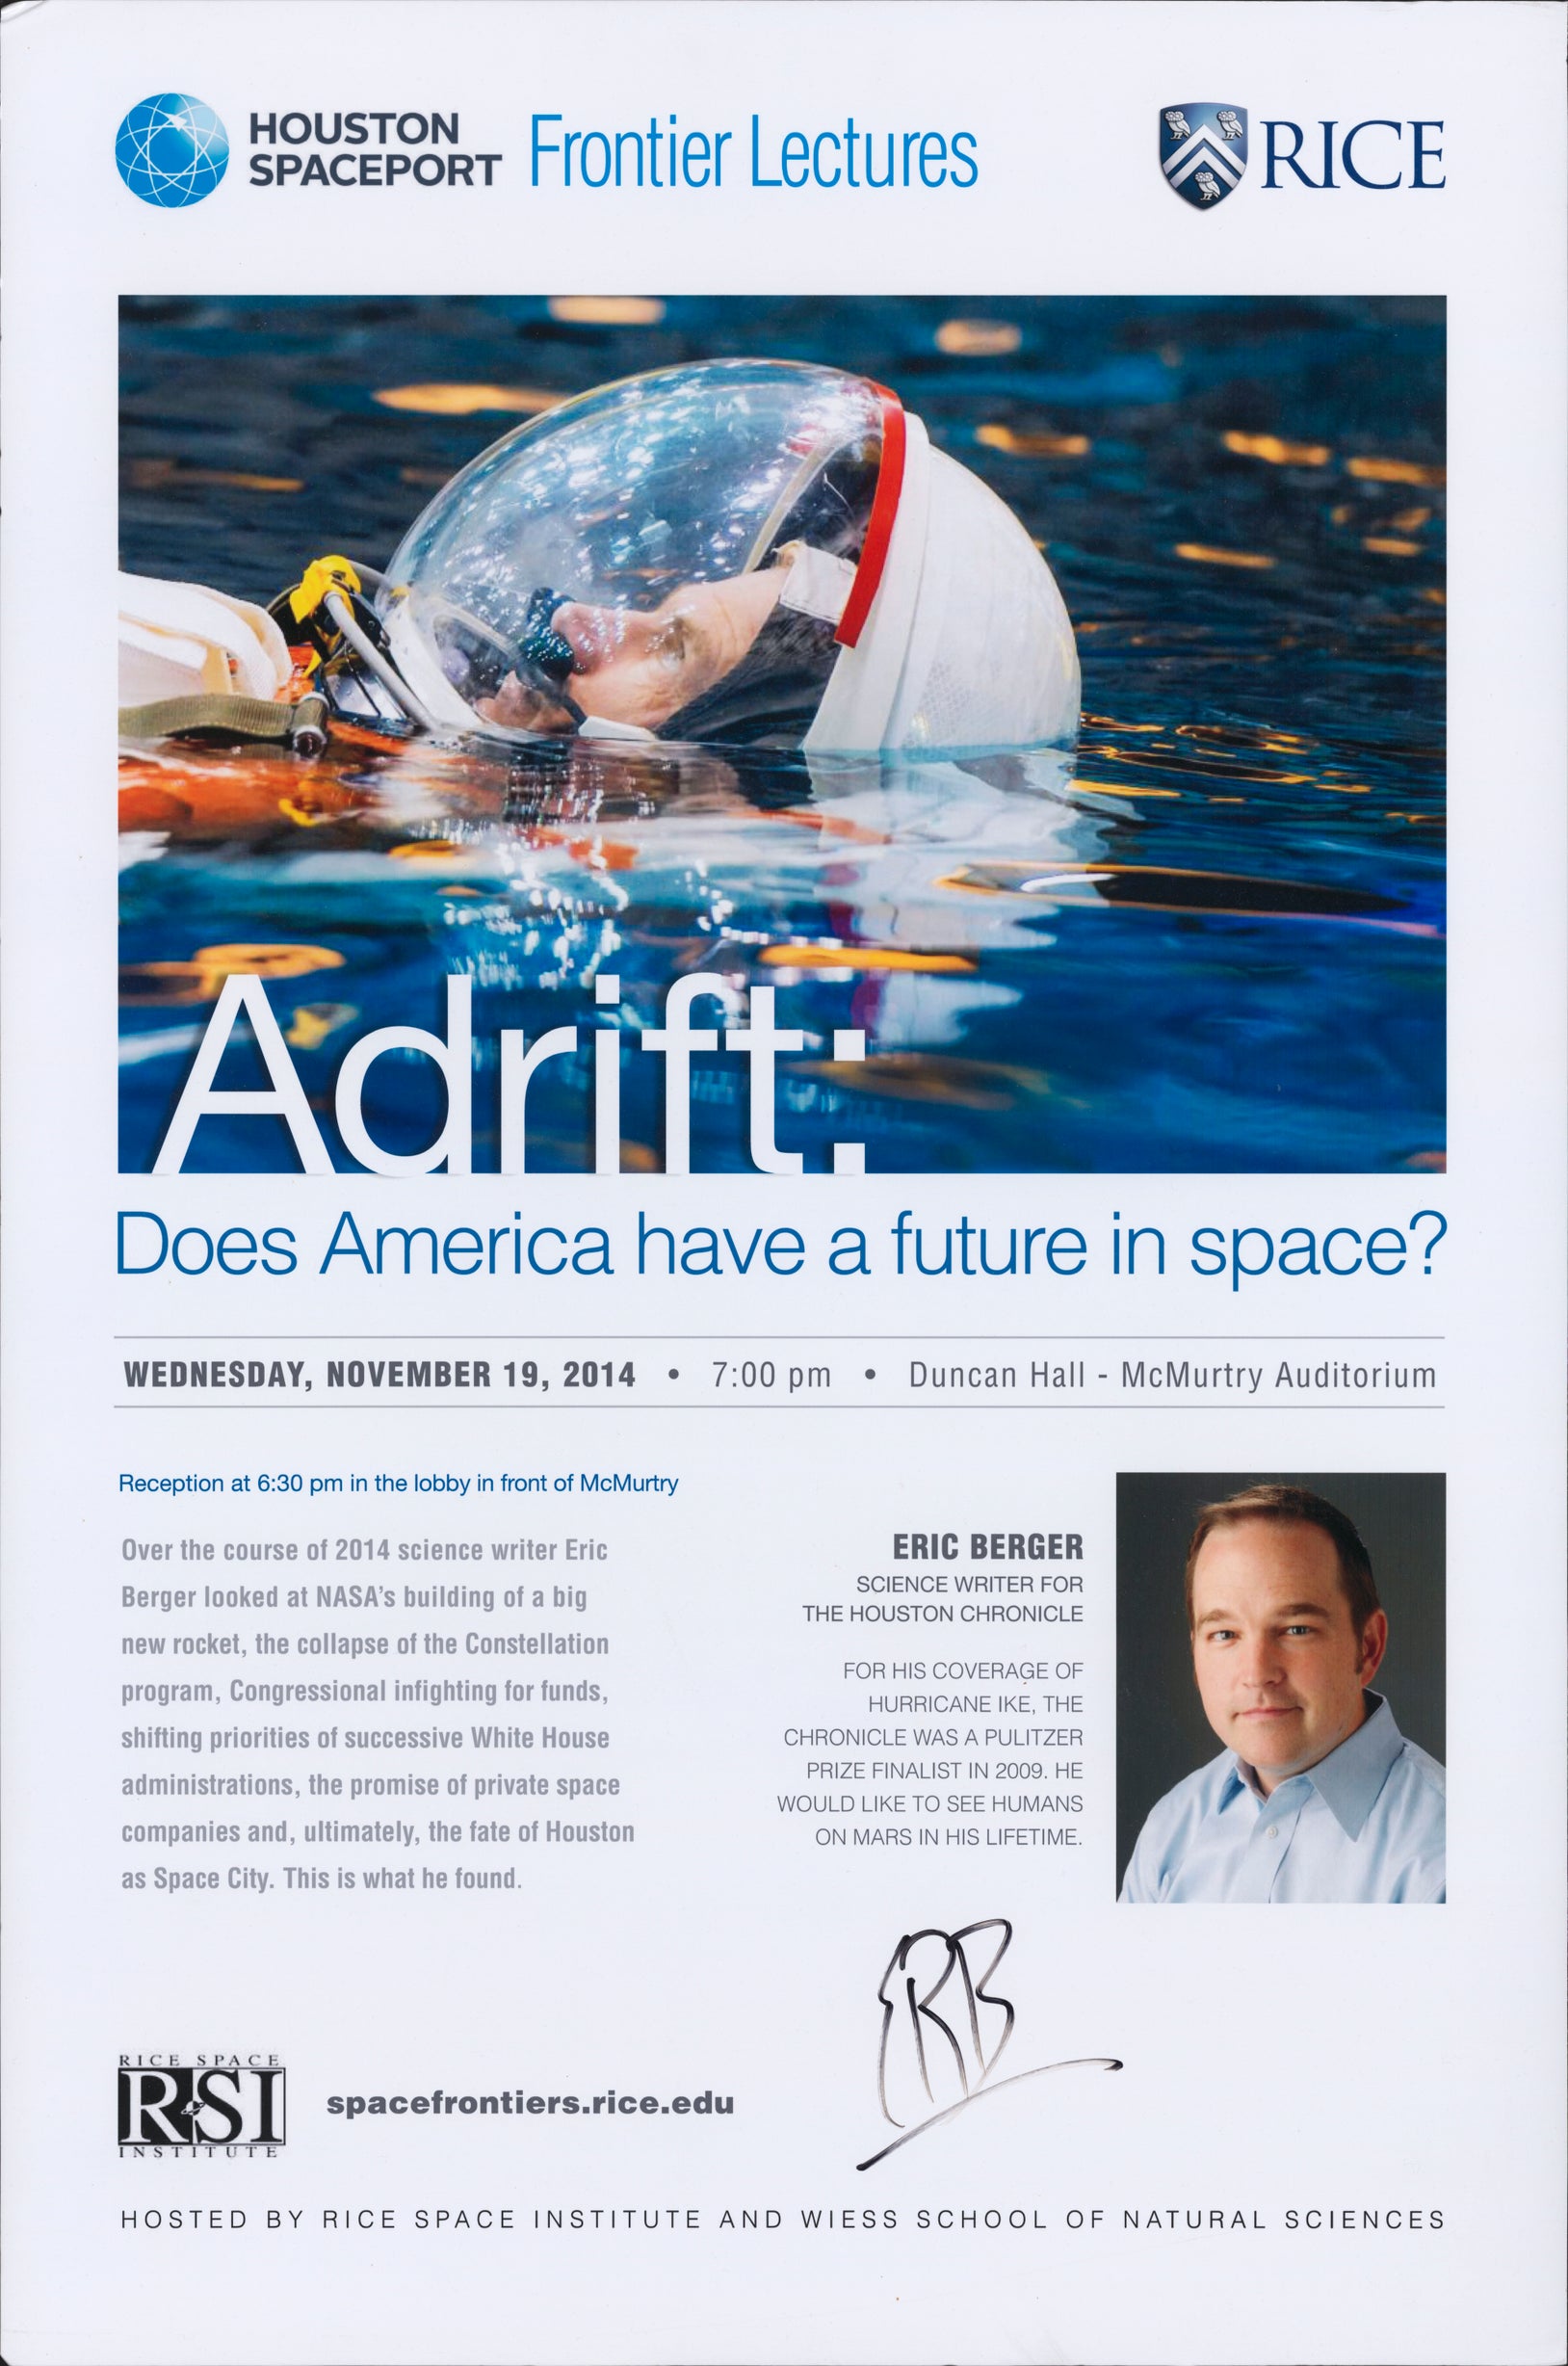 Poster of "ADRIFT: Does America have a future in space?" by Eric Berger